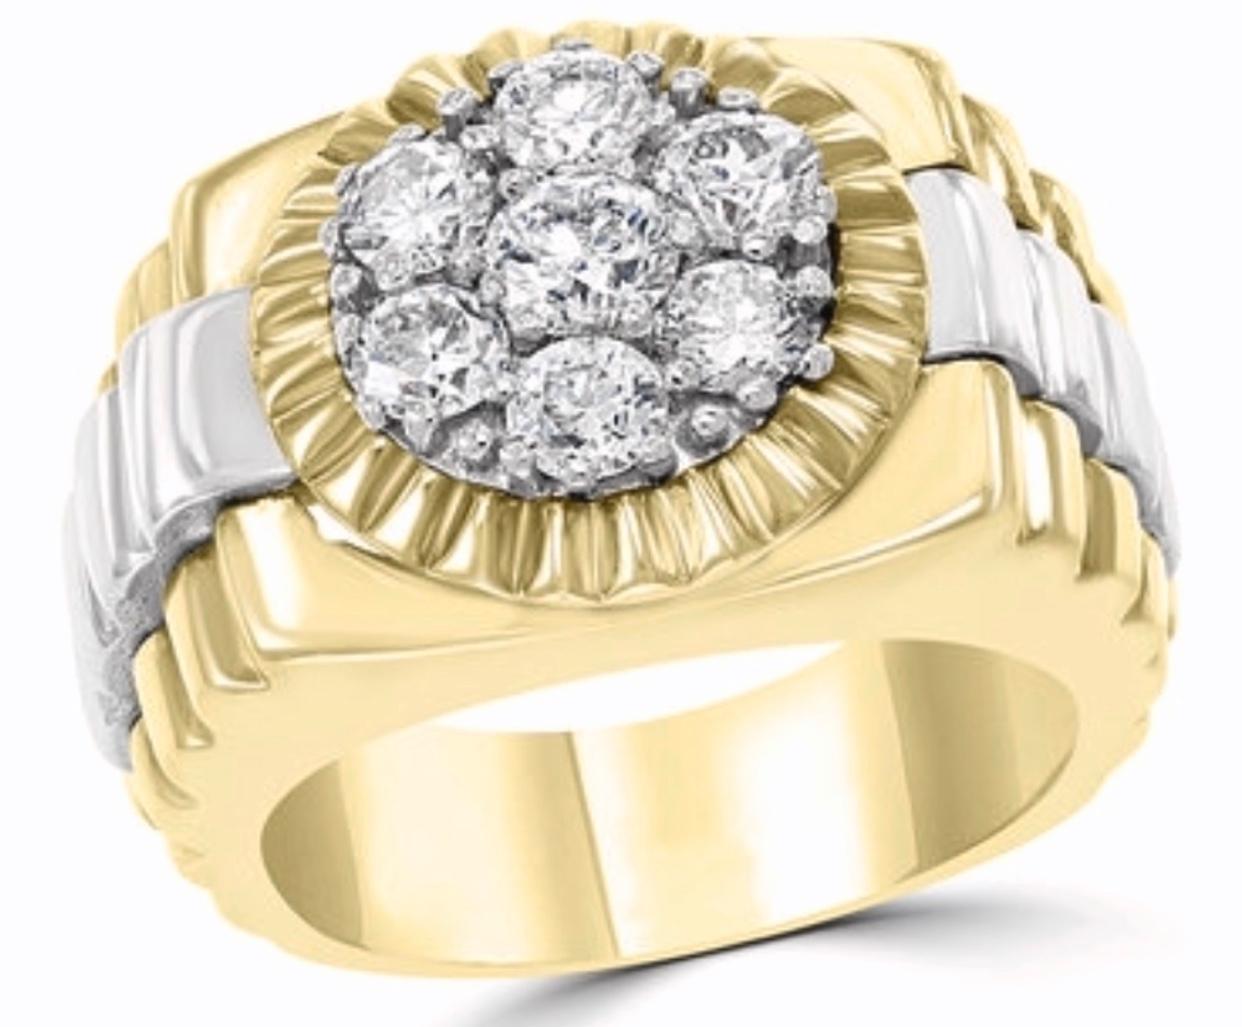 MENS DIAMOND CLUSTER RING BRILLIANT ROUND CUT 1.5 CARAT 7 STONE 18KT YELLOW GOLD

This is a Nice traditional 7  diamond  ring  from our premium wedding collection for Men
 7  Round diamonds VS quality are set to make a Flower . Natural